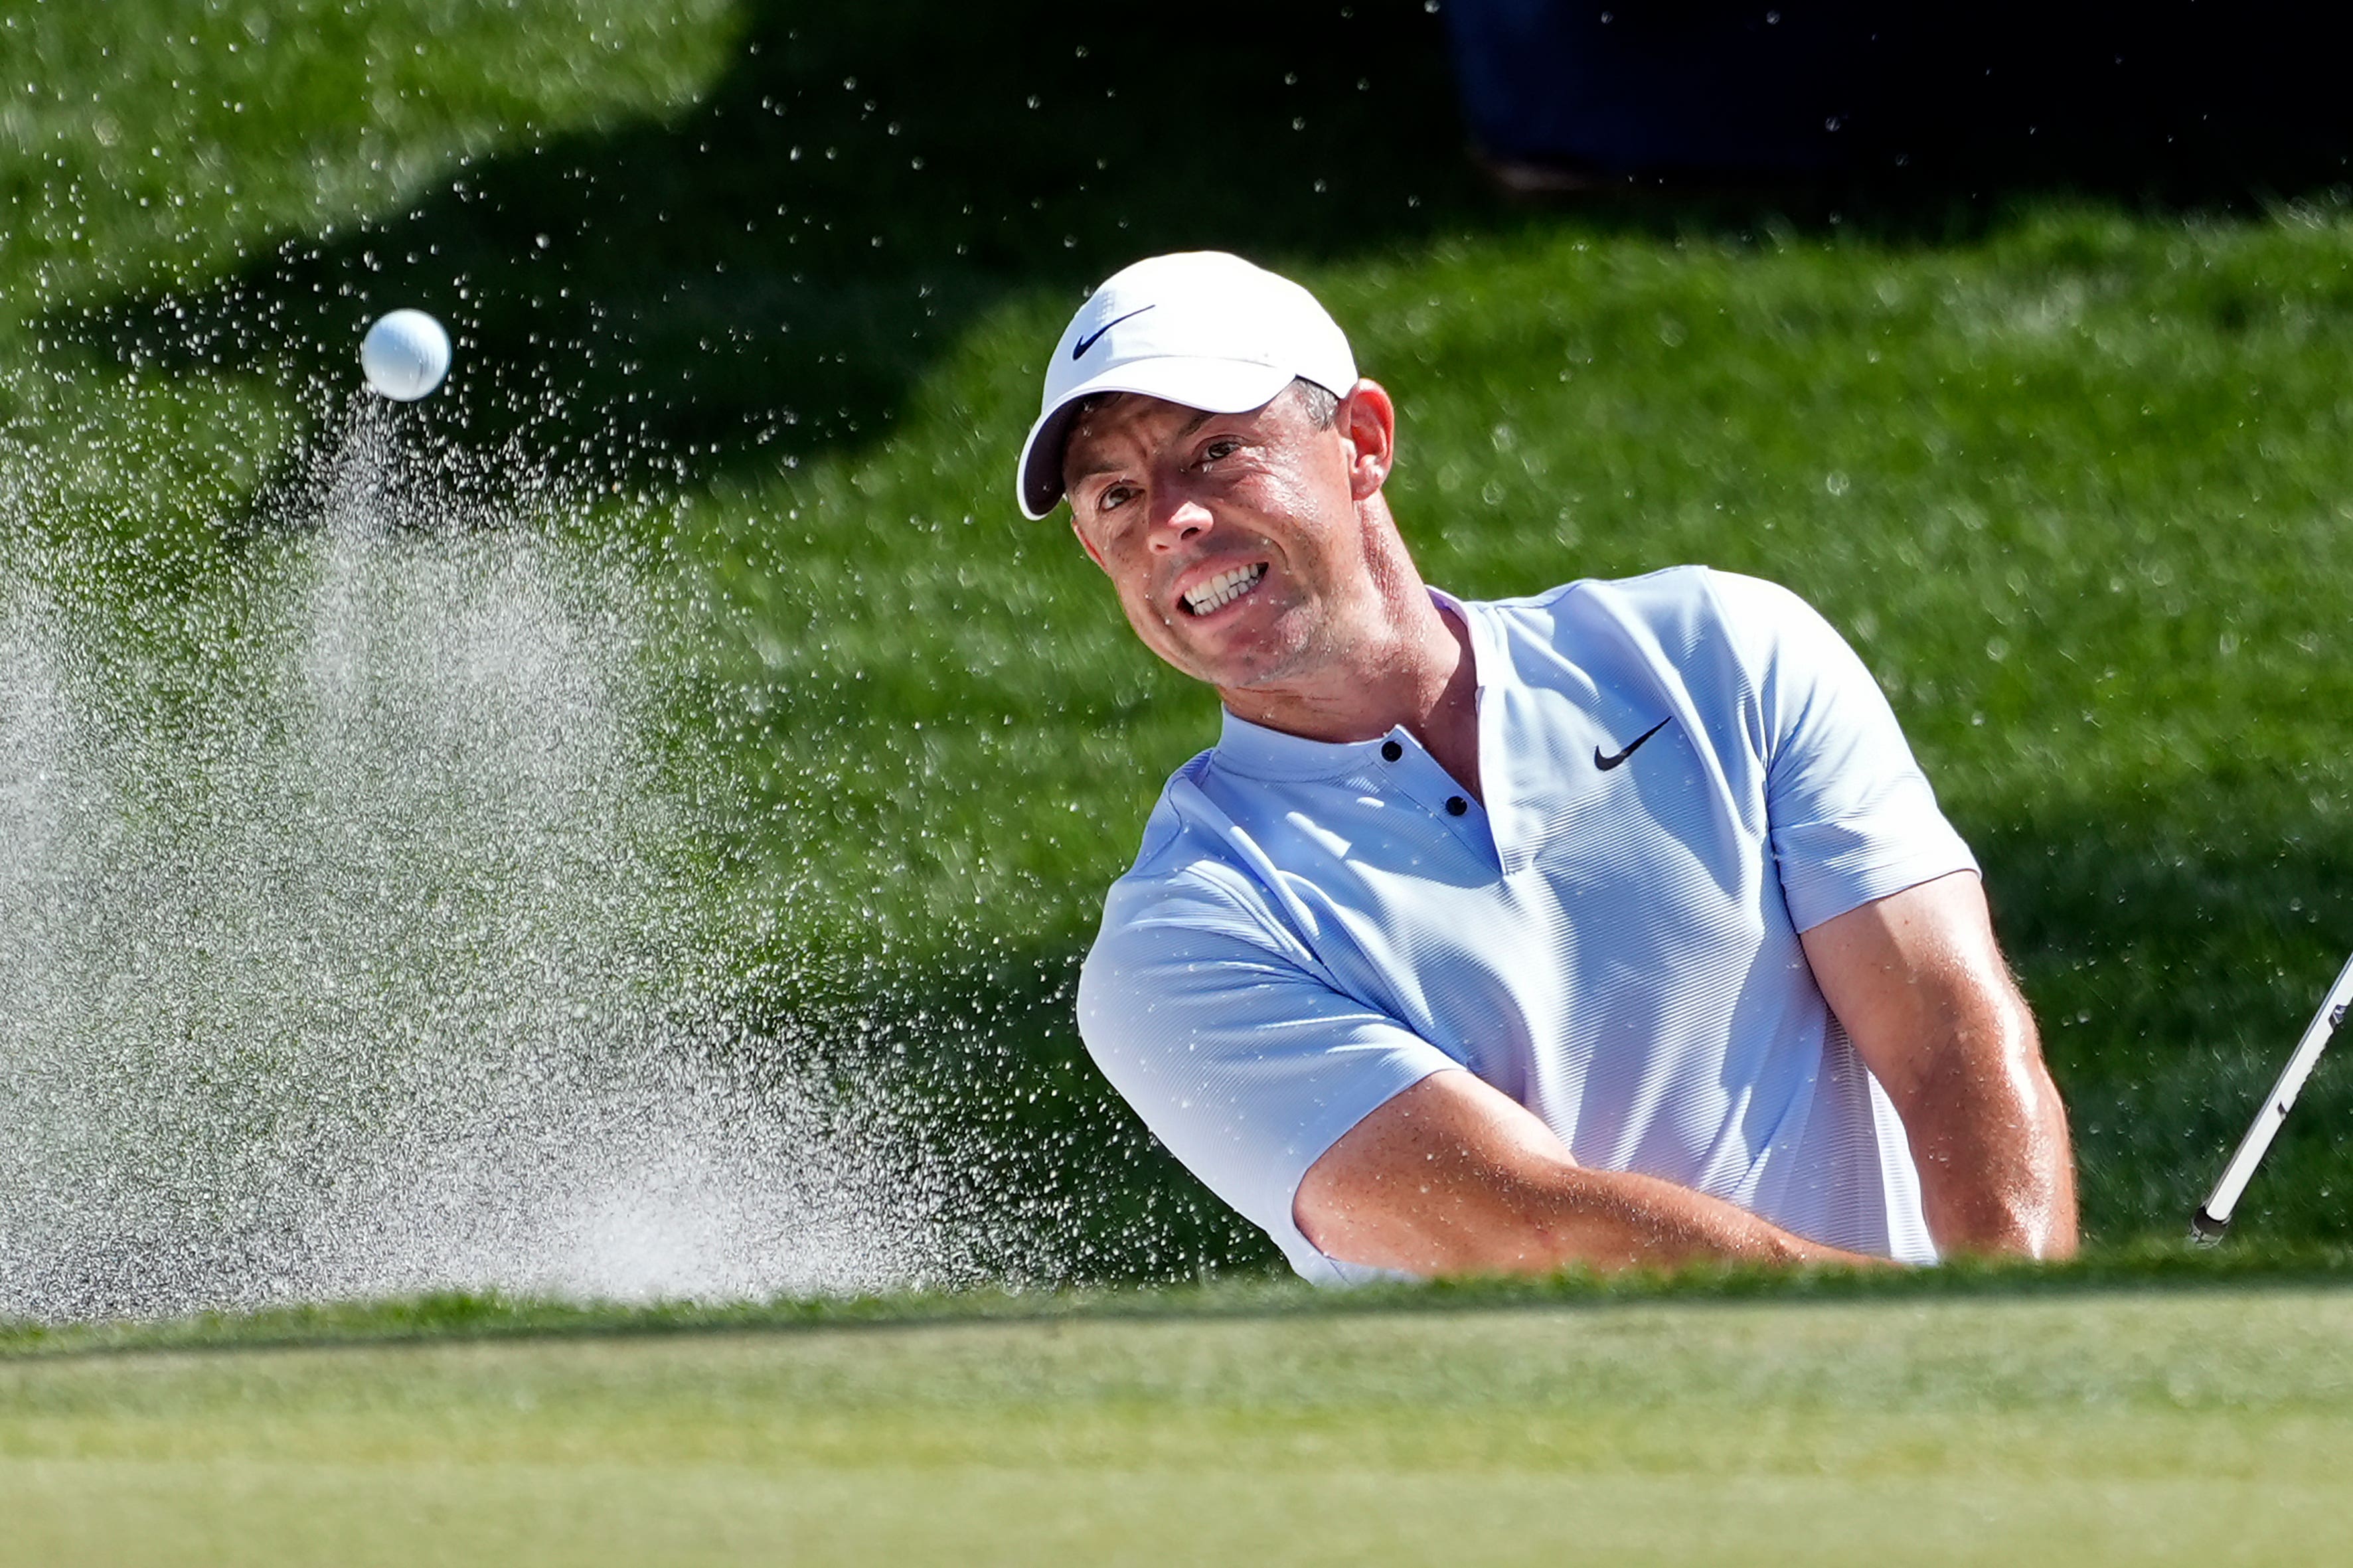 This will be McIlroy’s tenth attempt to complete a career grand slam